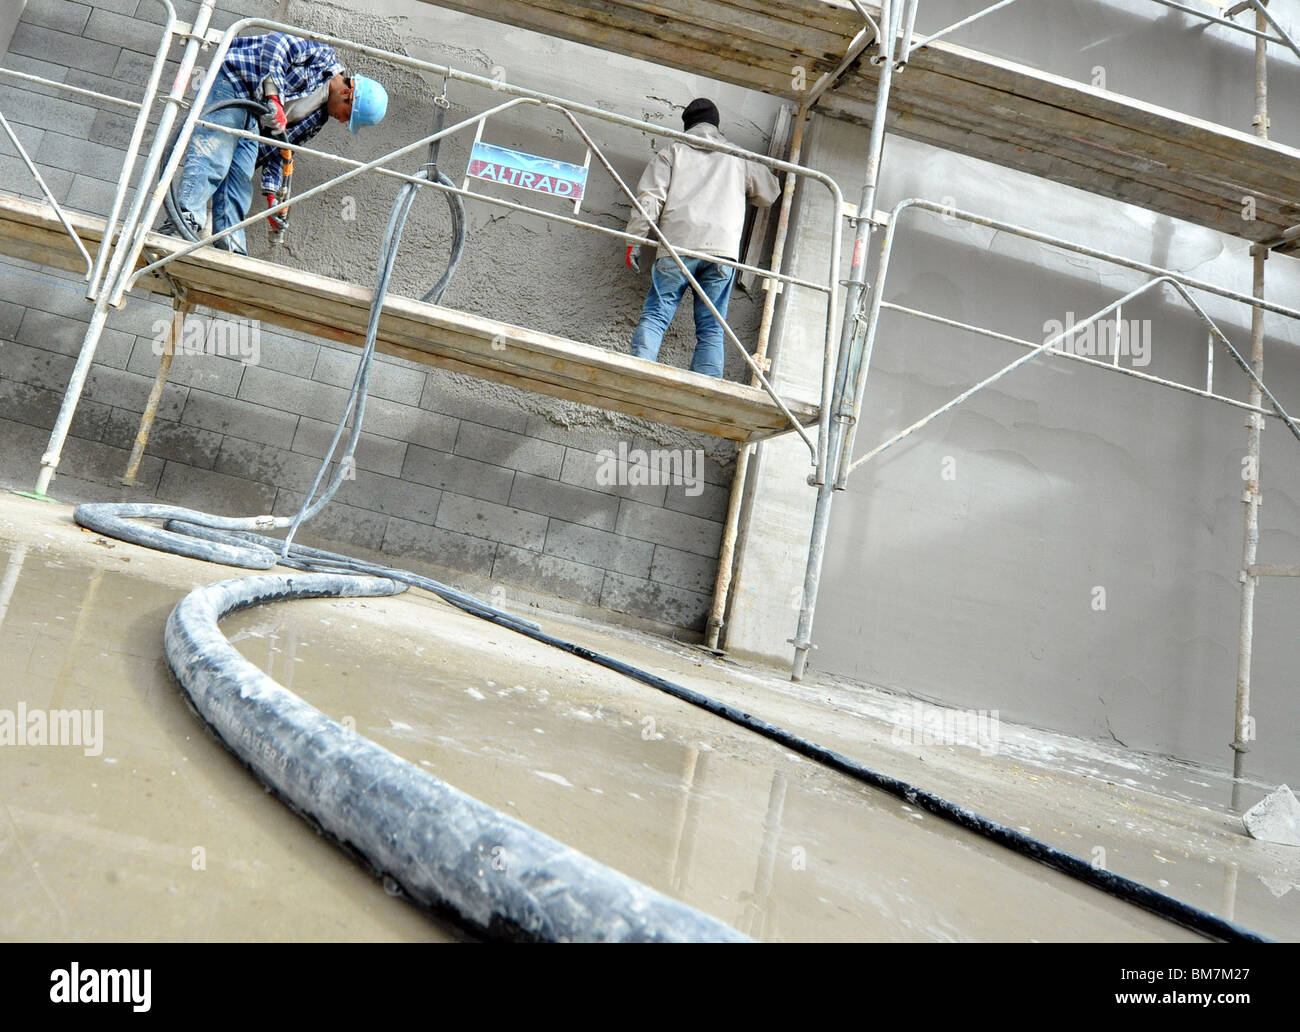 BTP (public buildings and work sector): Workers of a building site Stock Photo